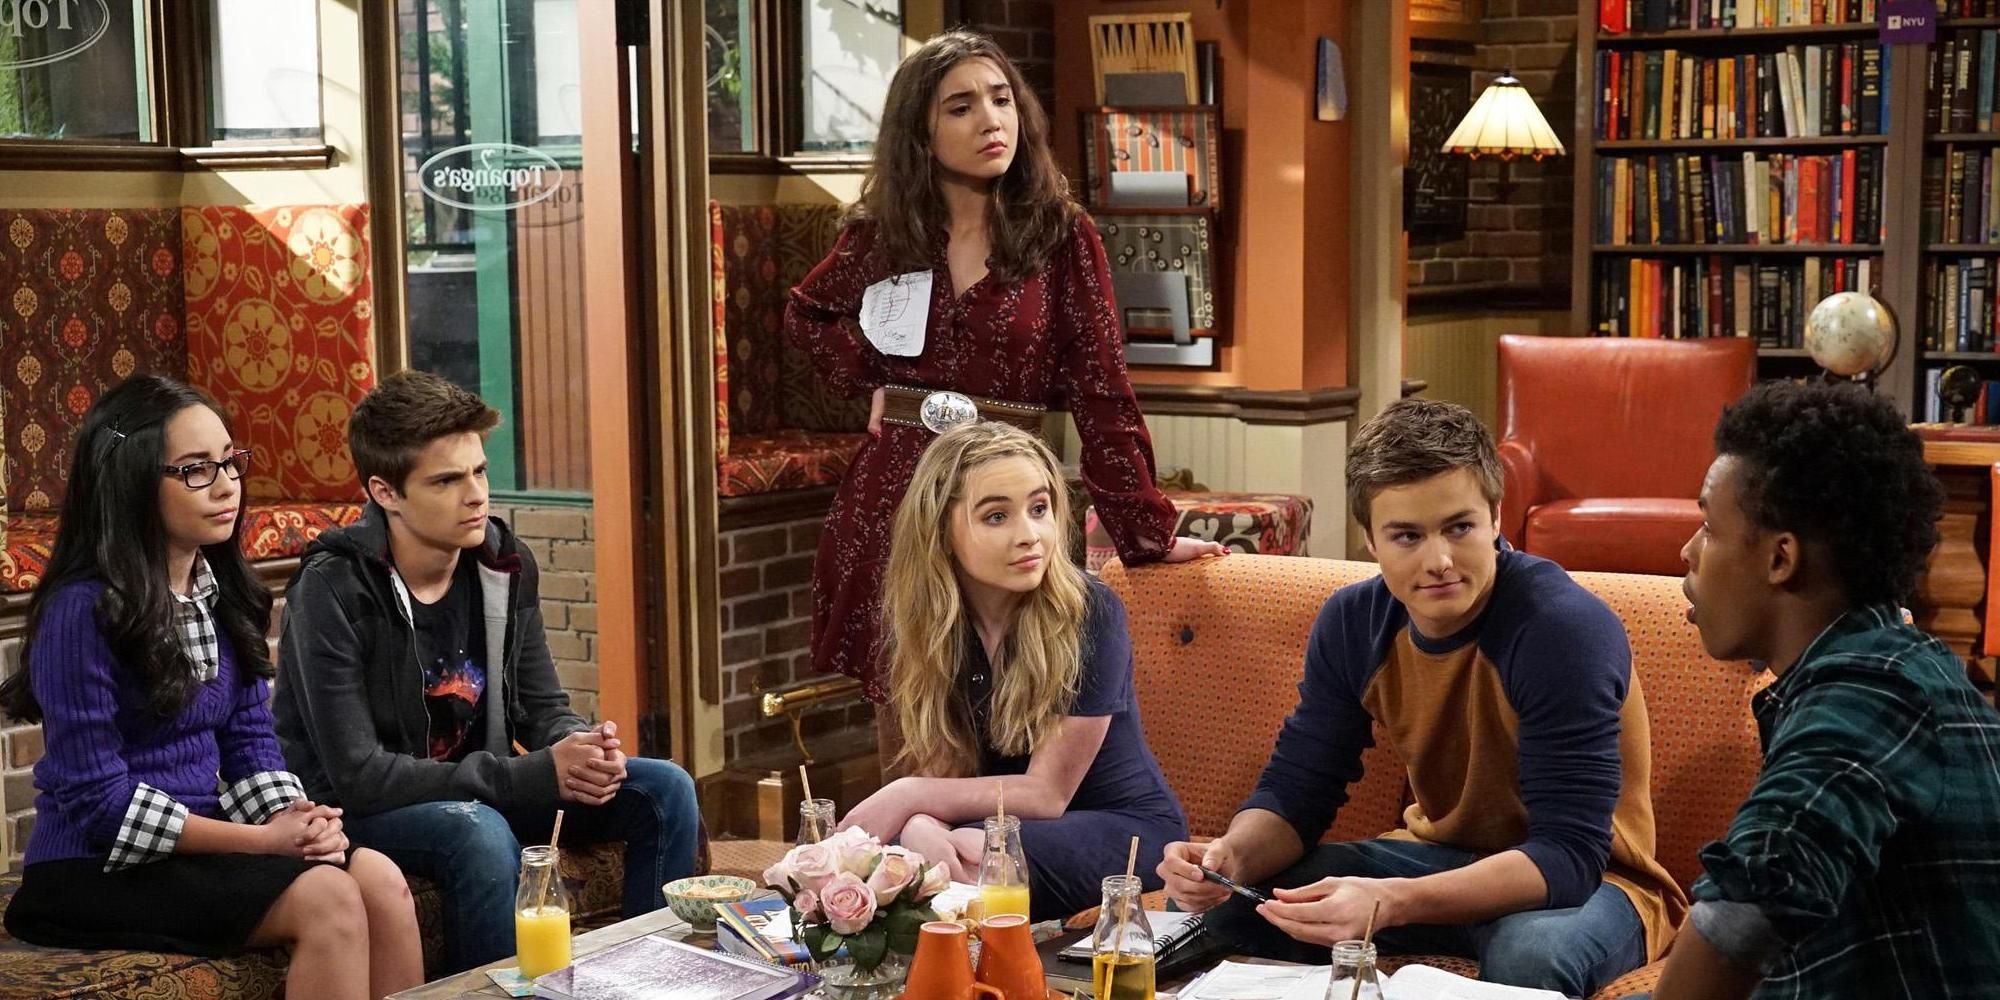 5 Things Boy Meets World Did Better Than Girl Meets World (& 5 Things Girl Meets World Did Better)